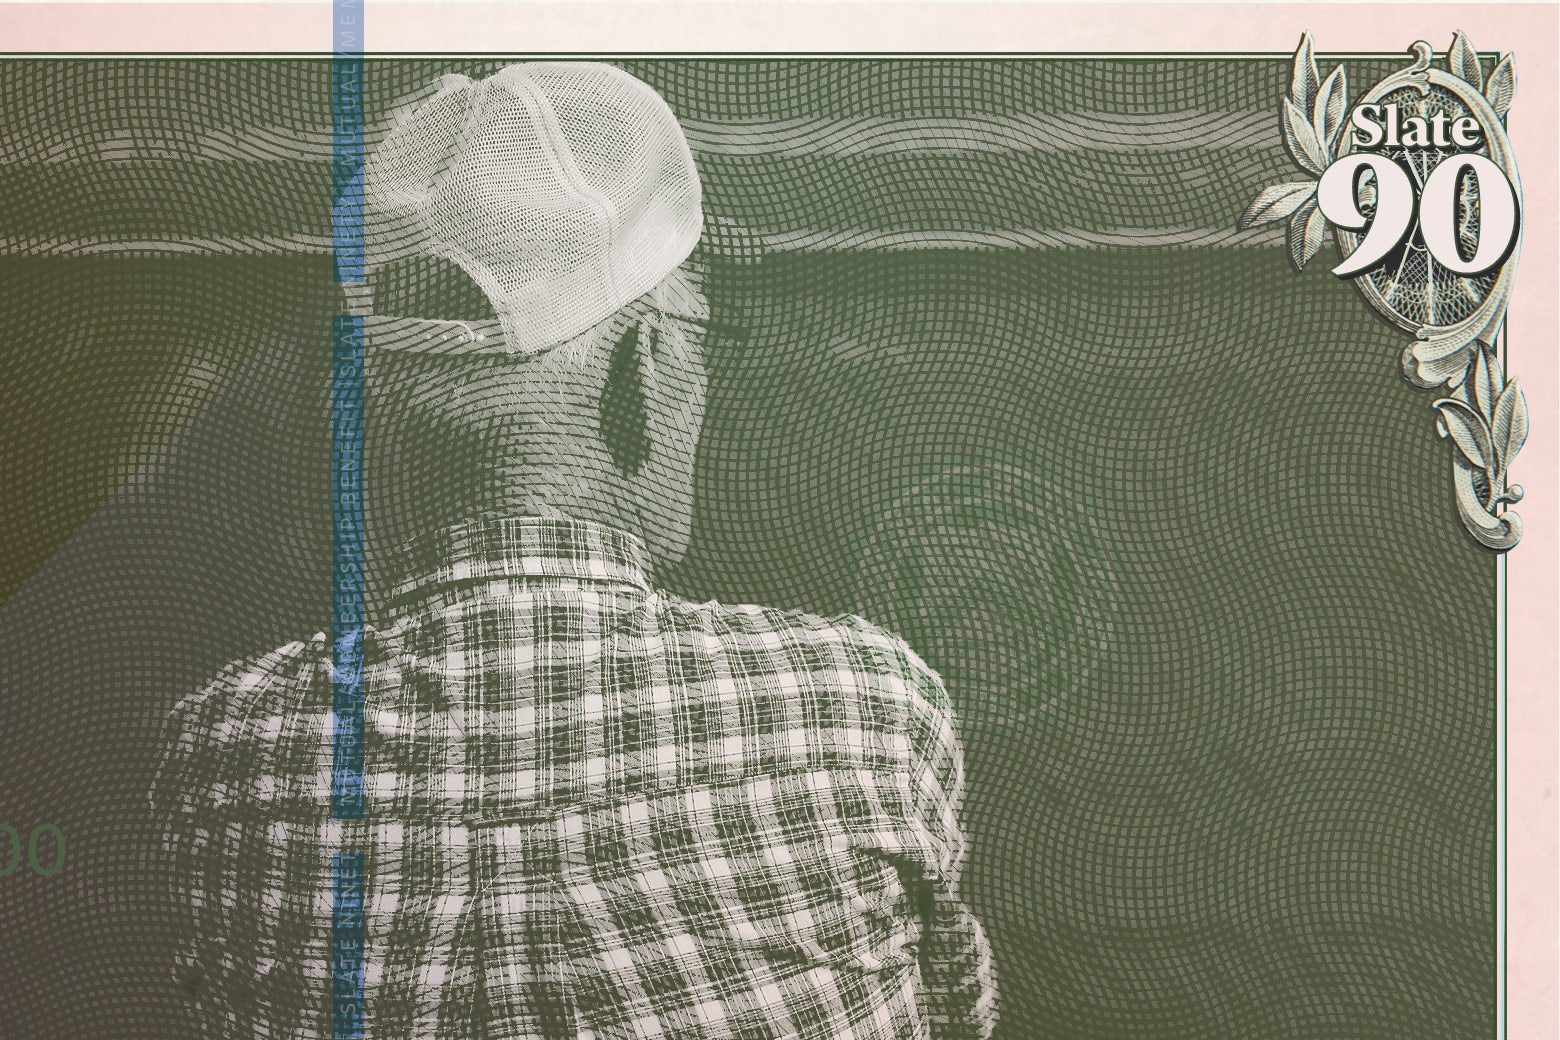 An older man in a plaid shirt and baseball cap, made to look like he's on a piece of paper money.